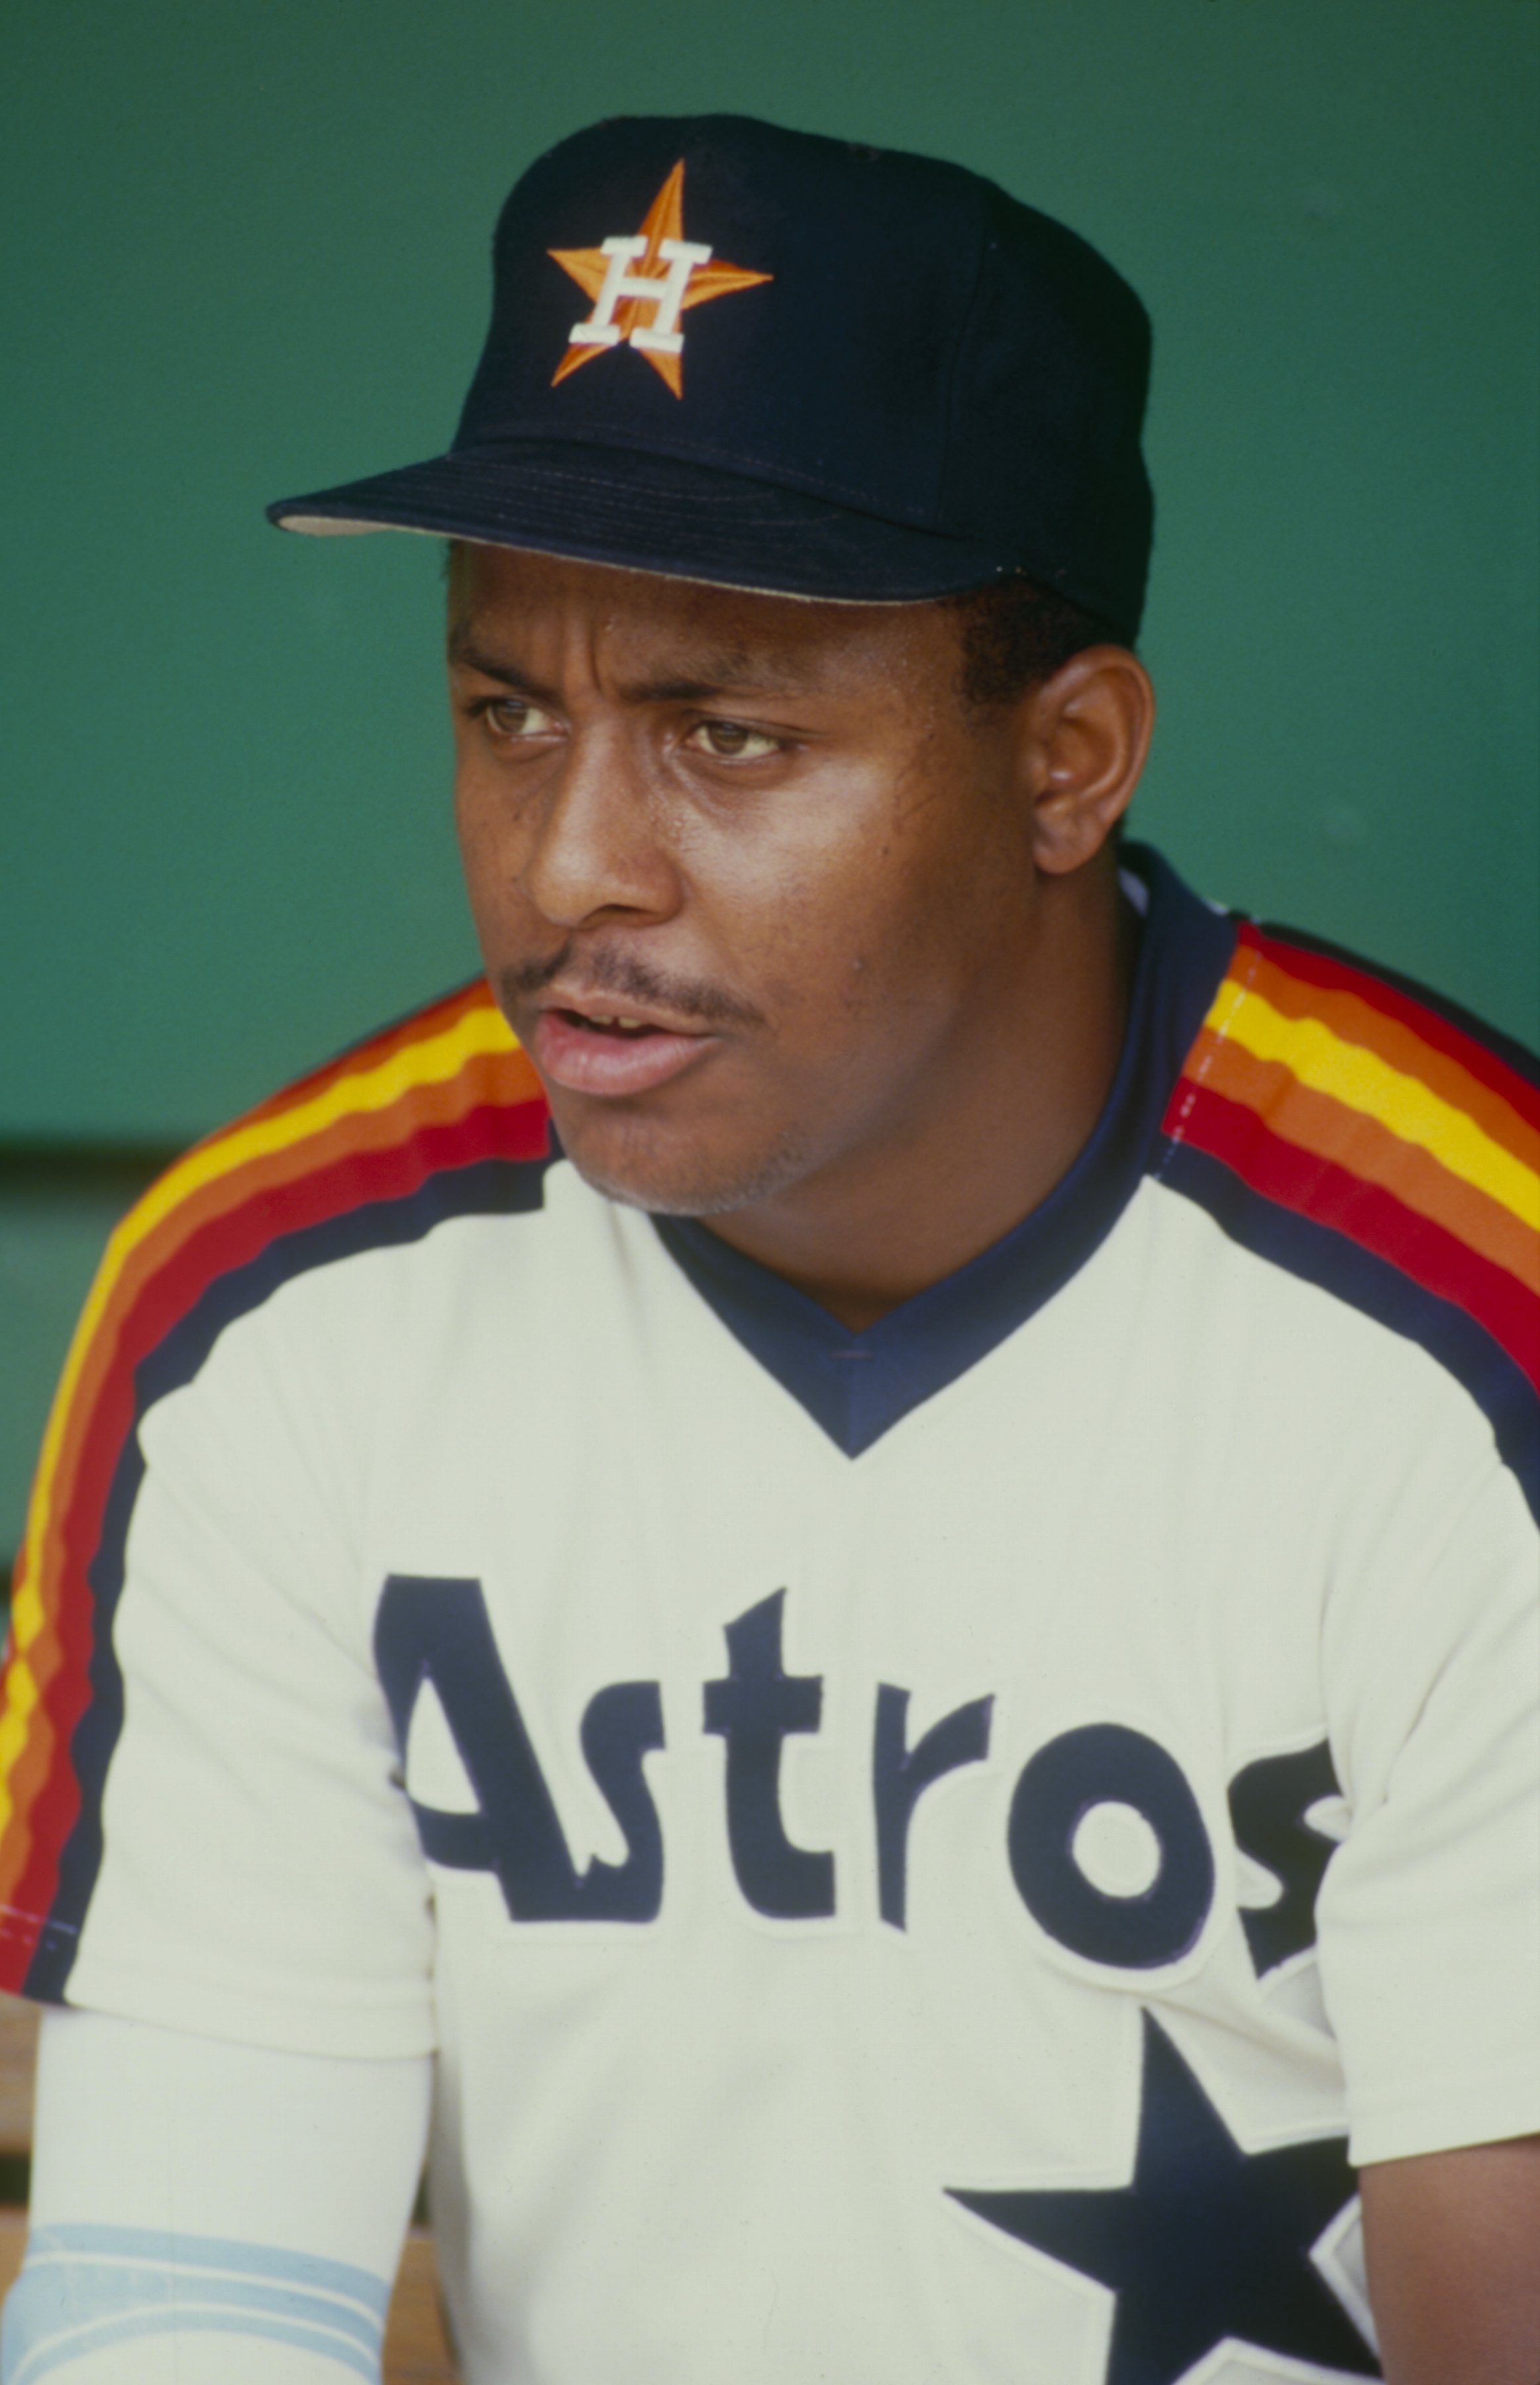 1987:  Billy Hatcher of the Houston Astros looks on during a game in the 1987 season. (Photo by Scott Halleran/Getty Images)